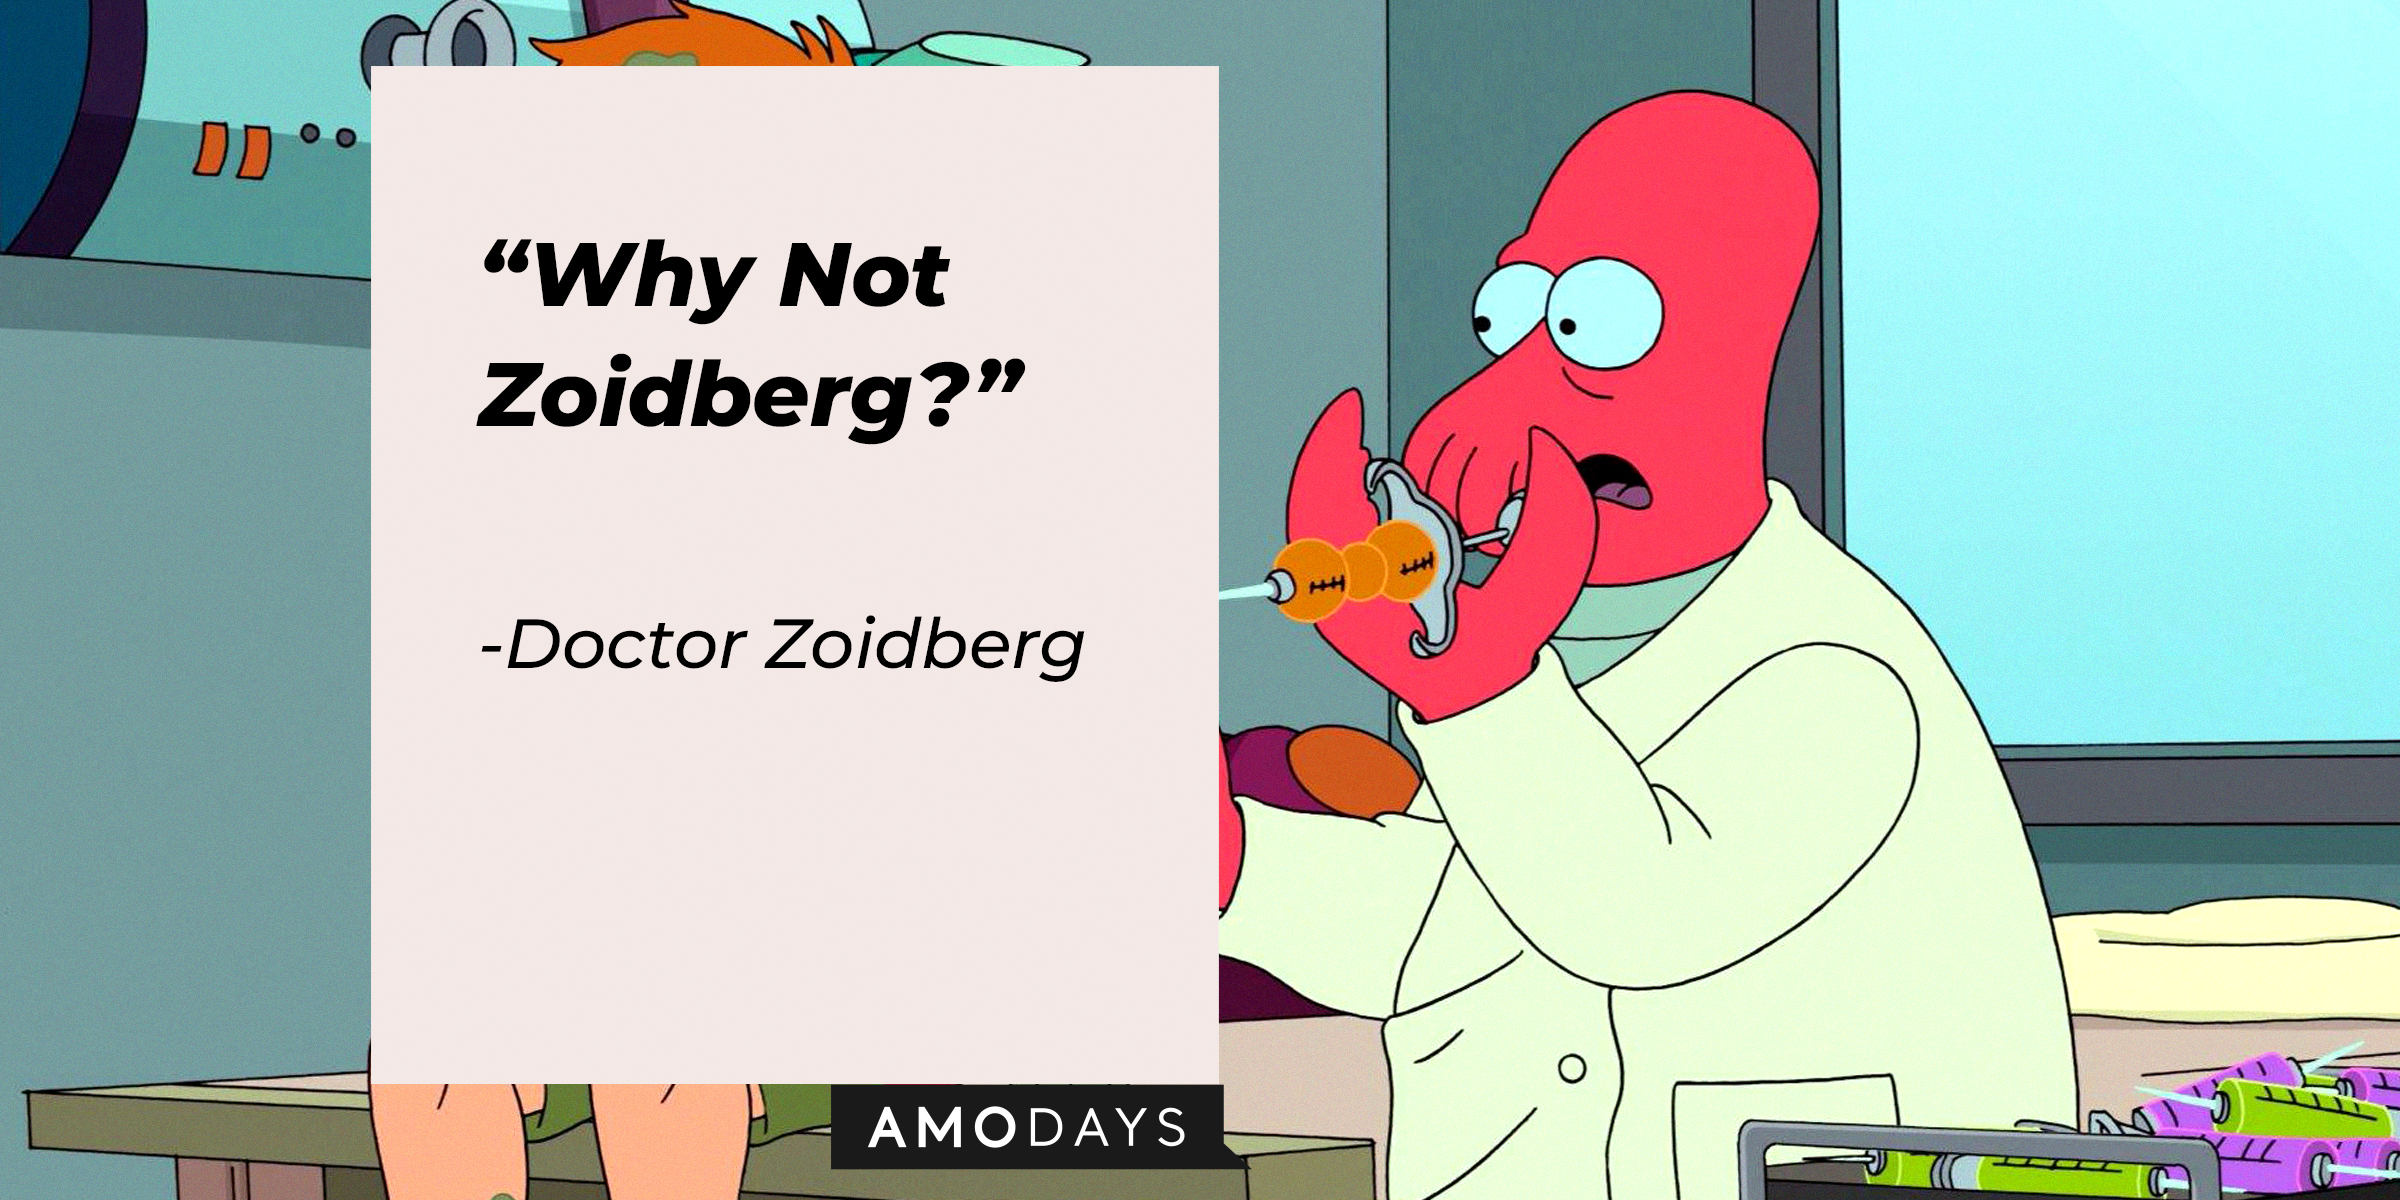 Doctor Zoidberg, with his quote: "Why not Zoidberg?" | Source: facebook.com/Futurama